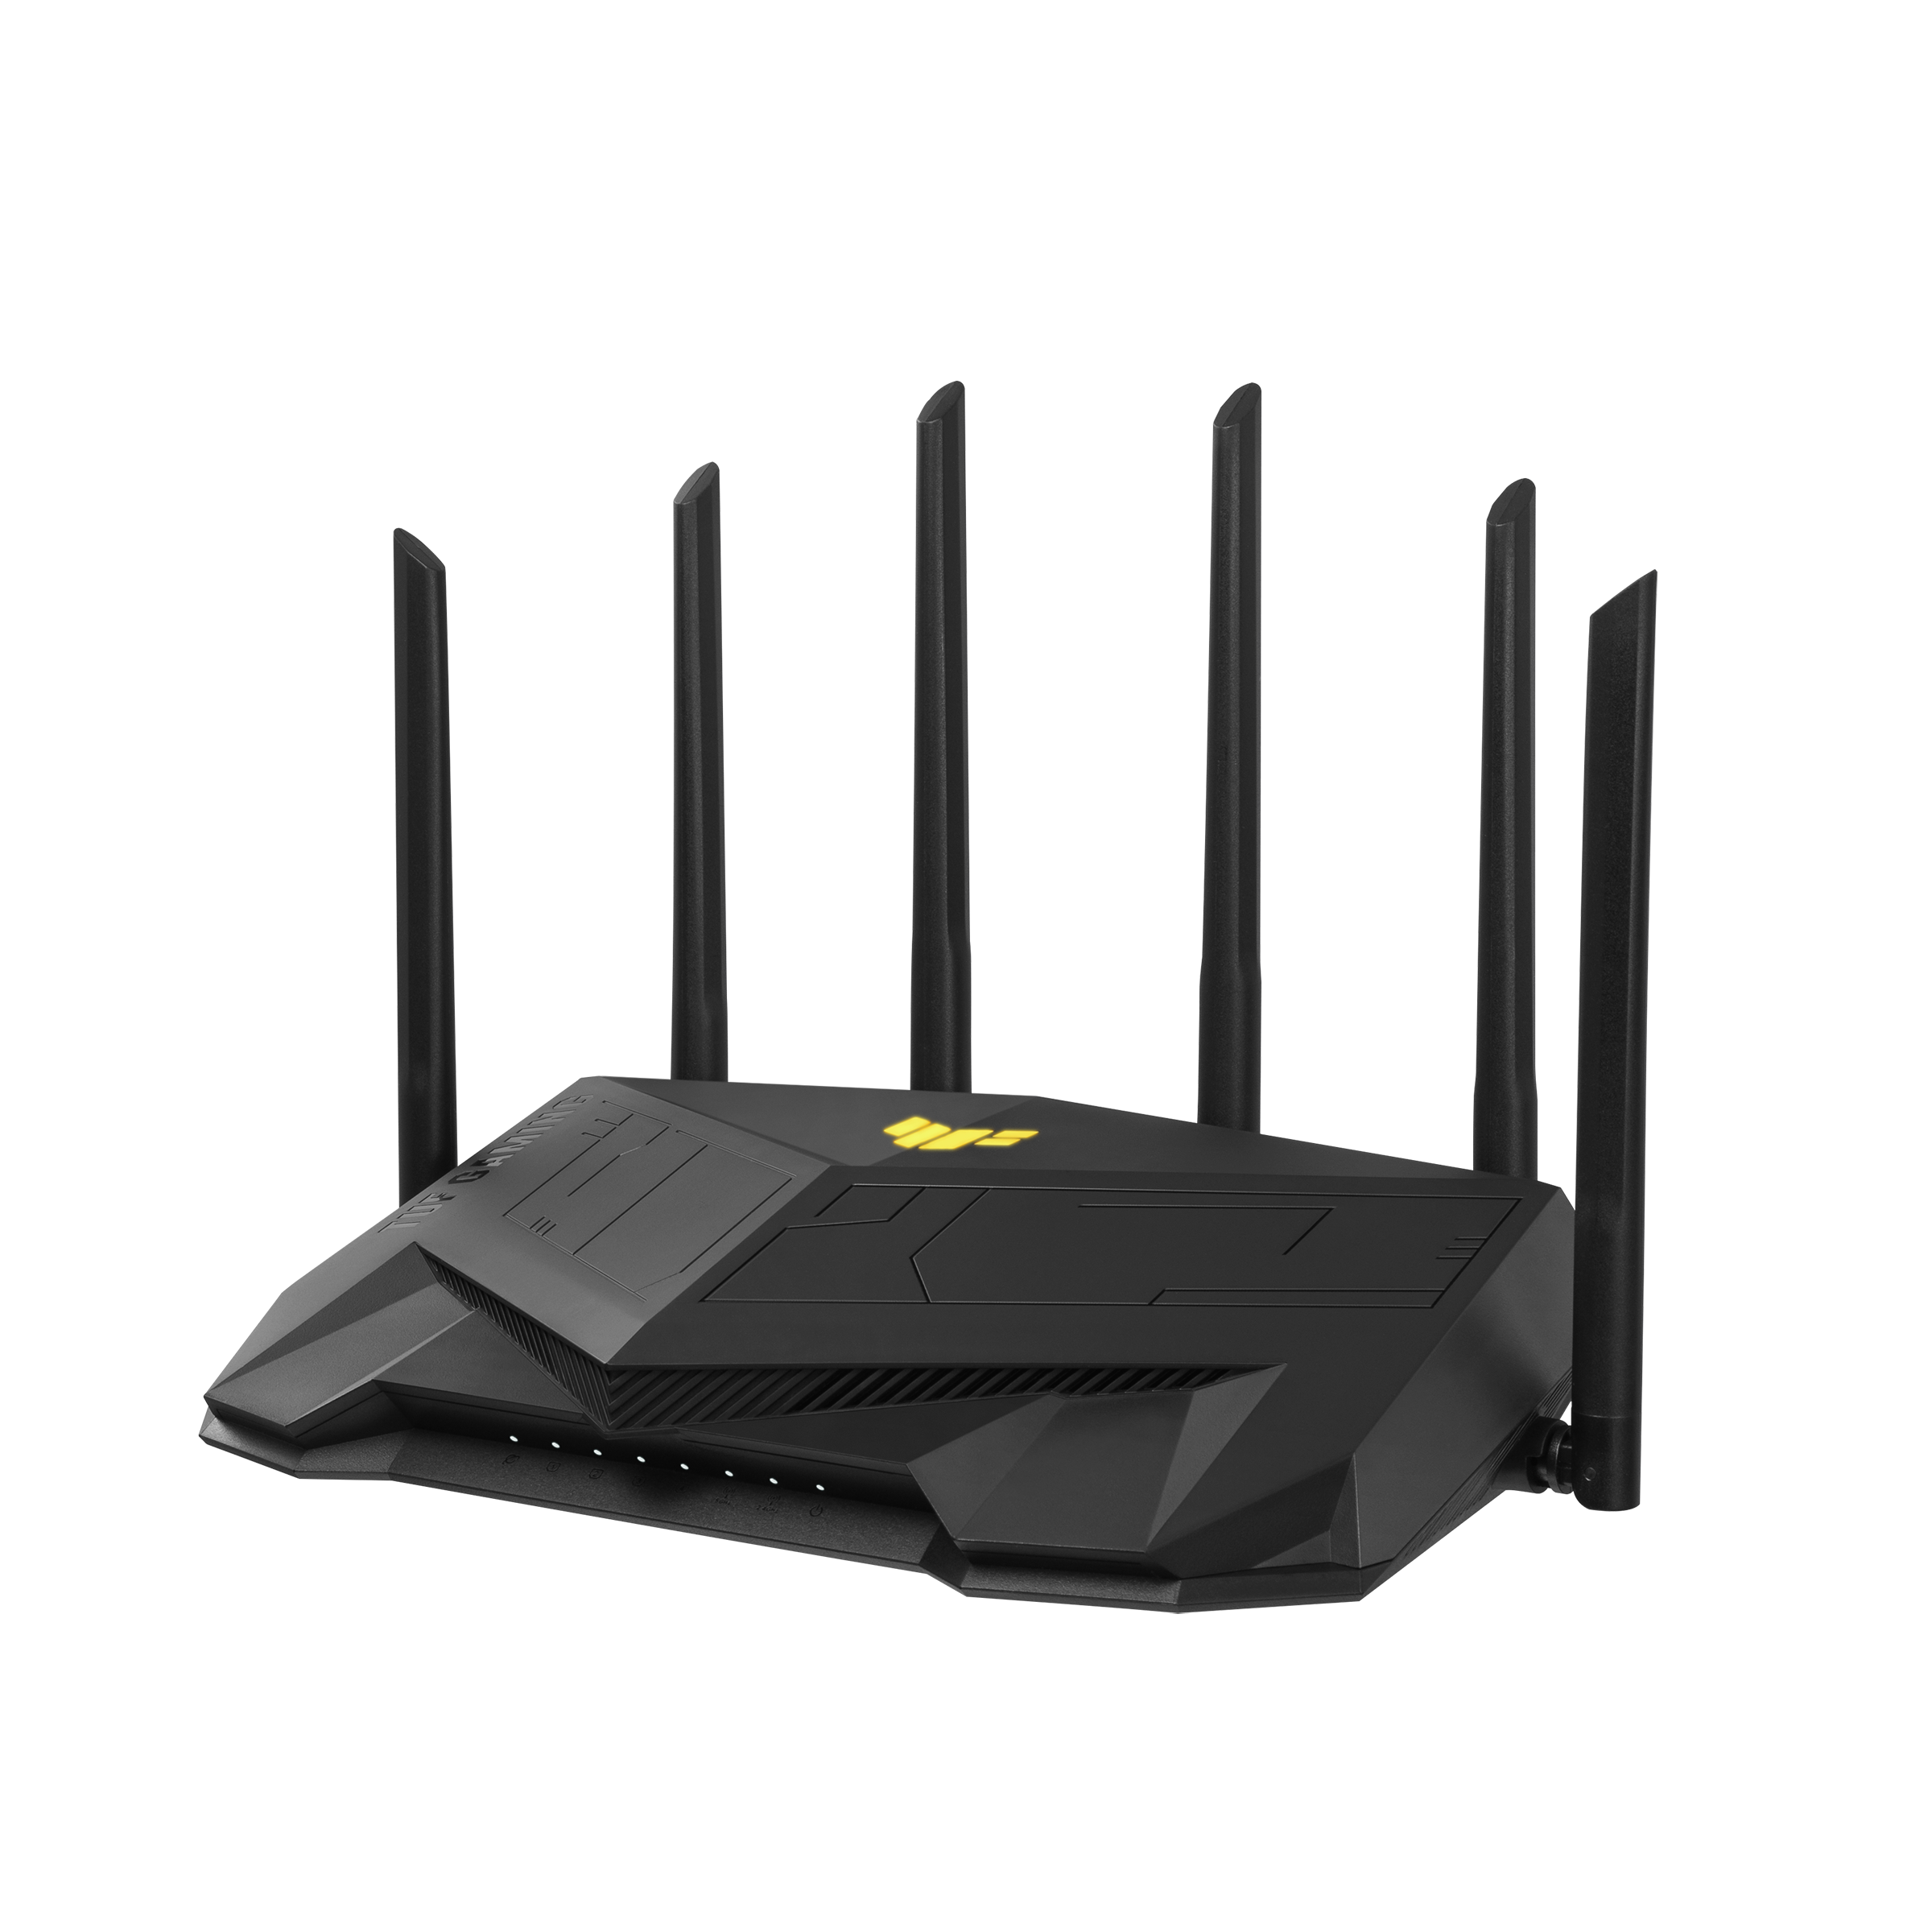 TUF Gaming AX5400｜WiFi Routers｜ASUS Global